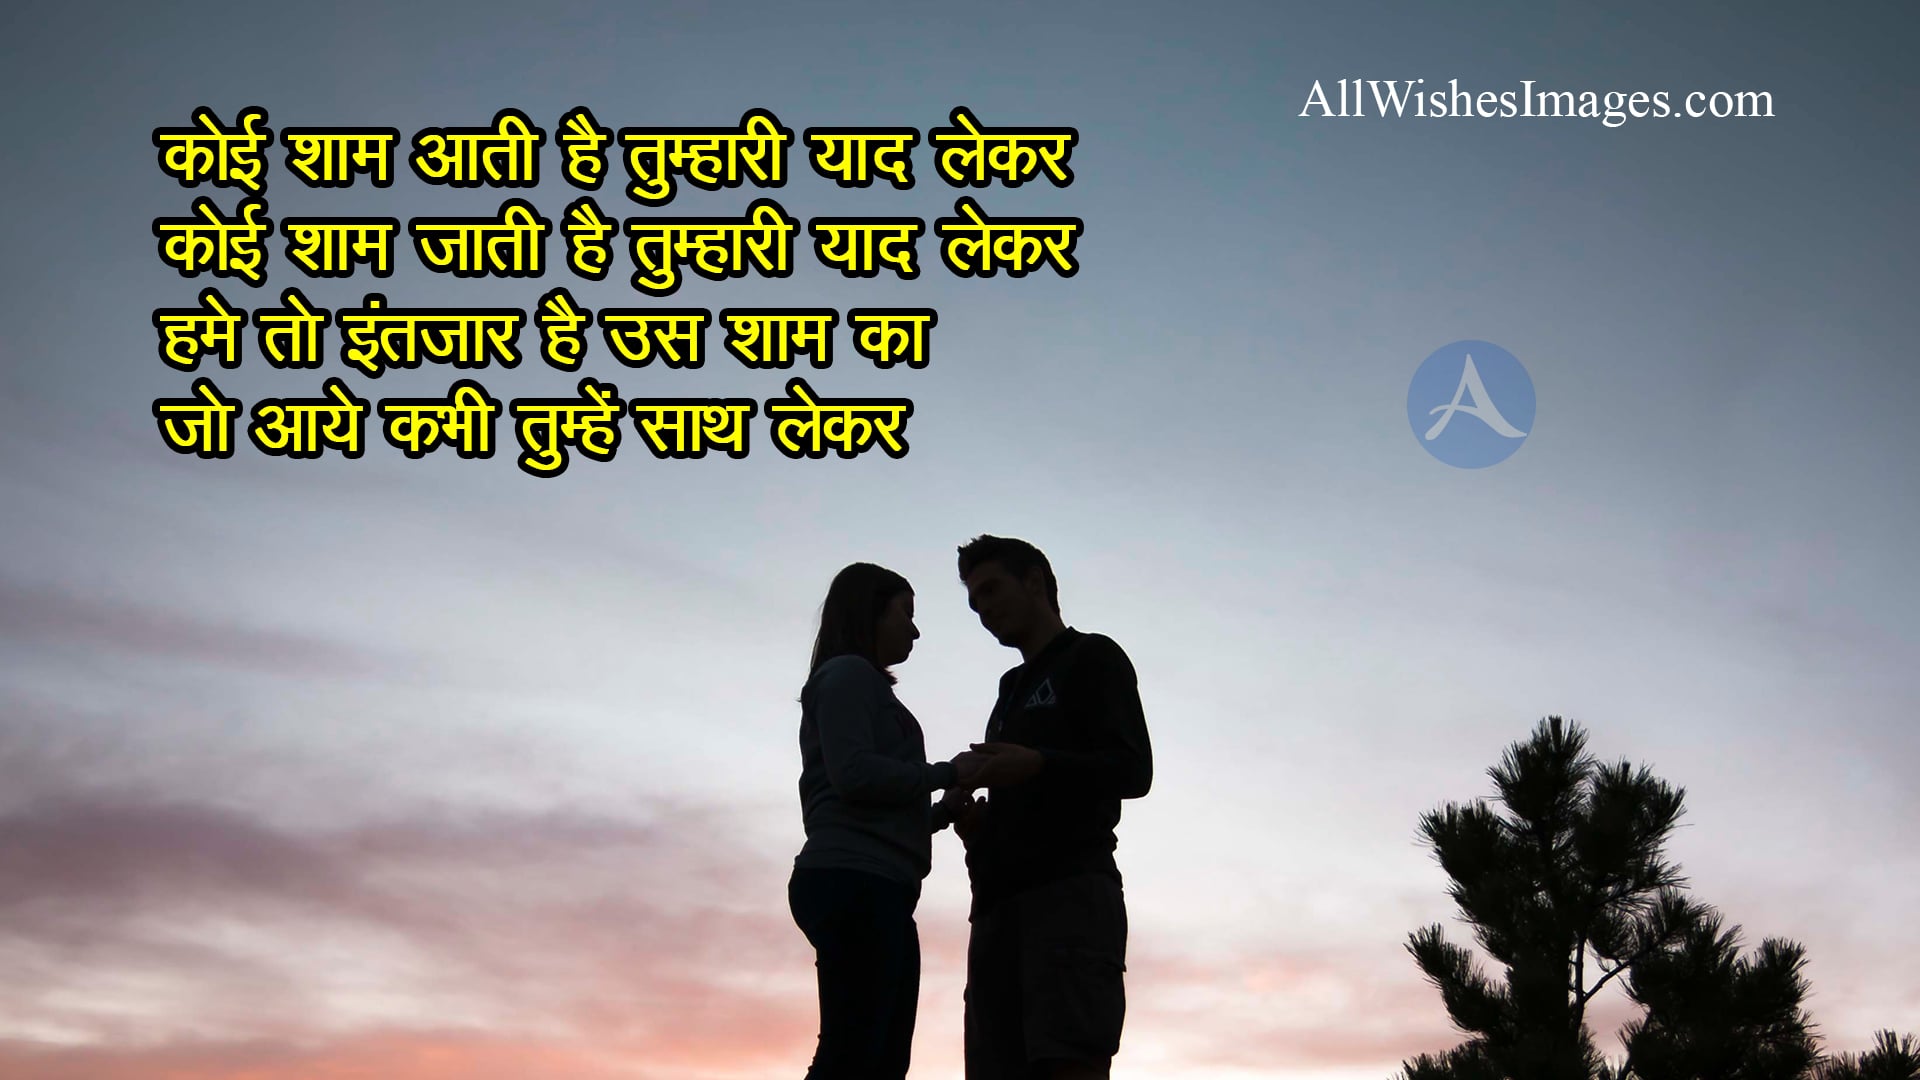 Love Shayari Fb Status - All Wishes Images - Images for WhatsApp